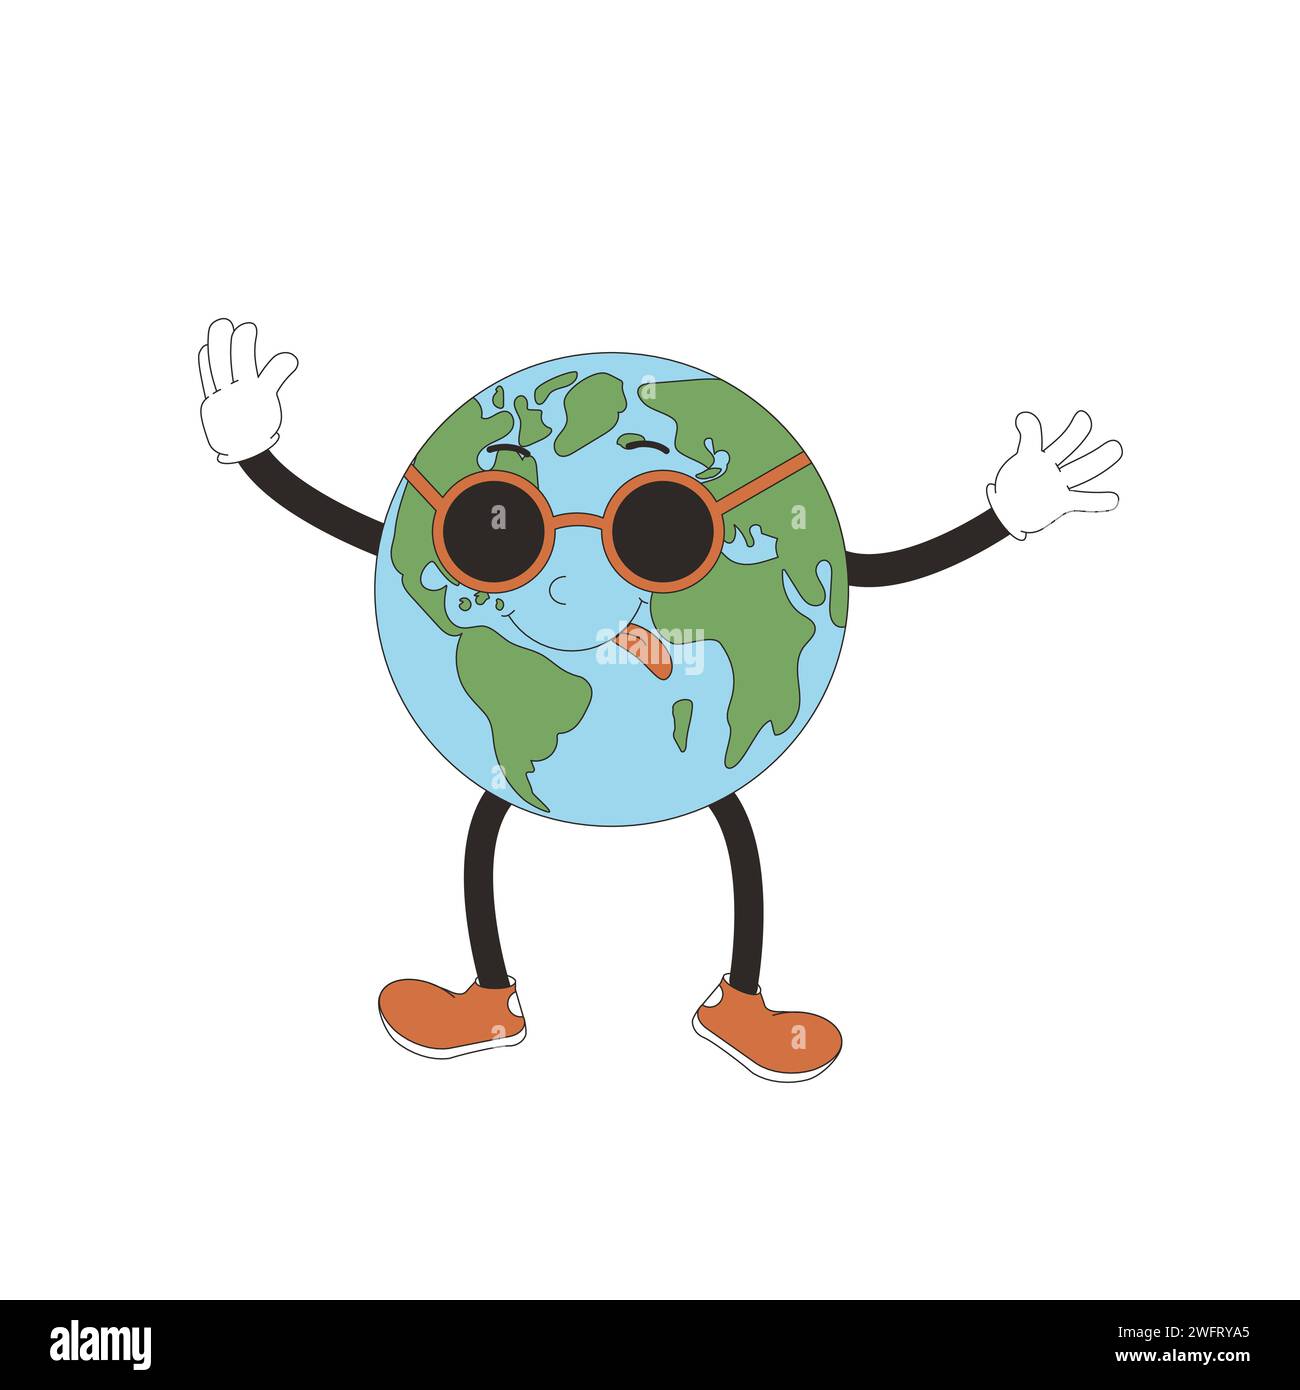 Planet Earth mascot in retro style. Cute globe character with sunglasses waving his hand isolated on white background. Vector illustration. Stock Vector